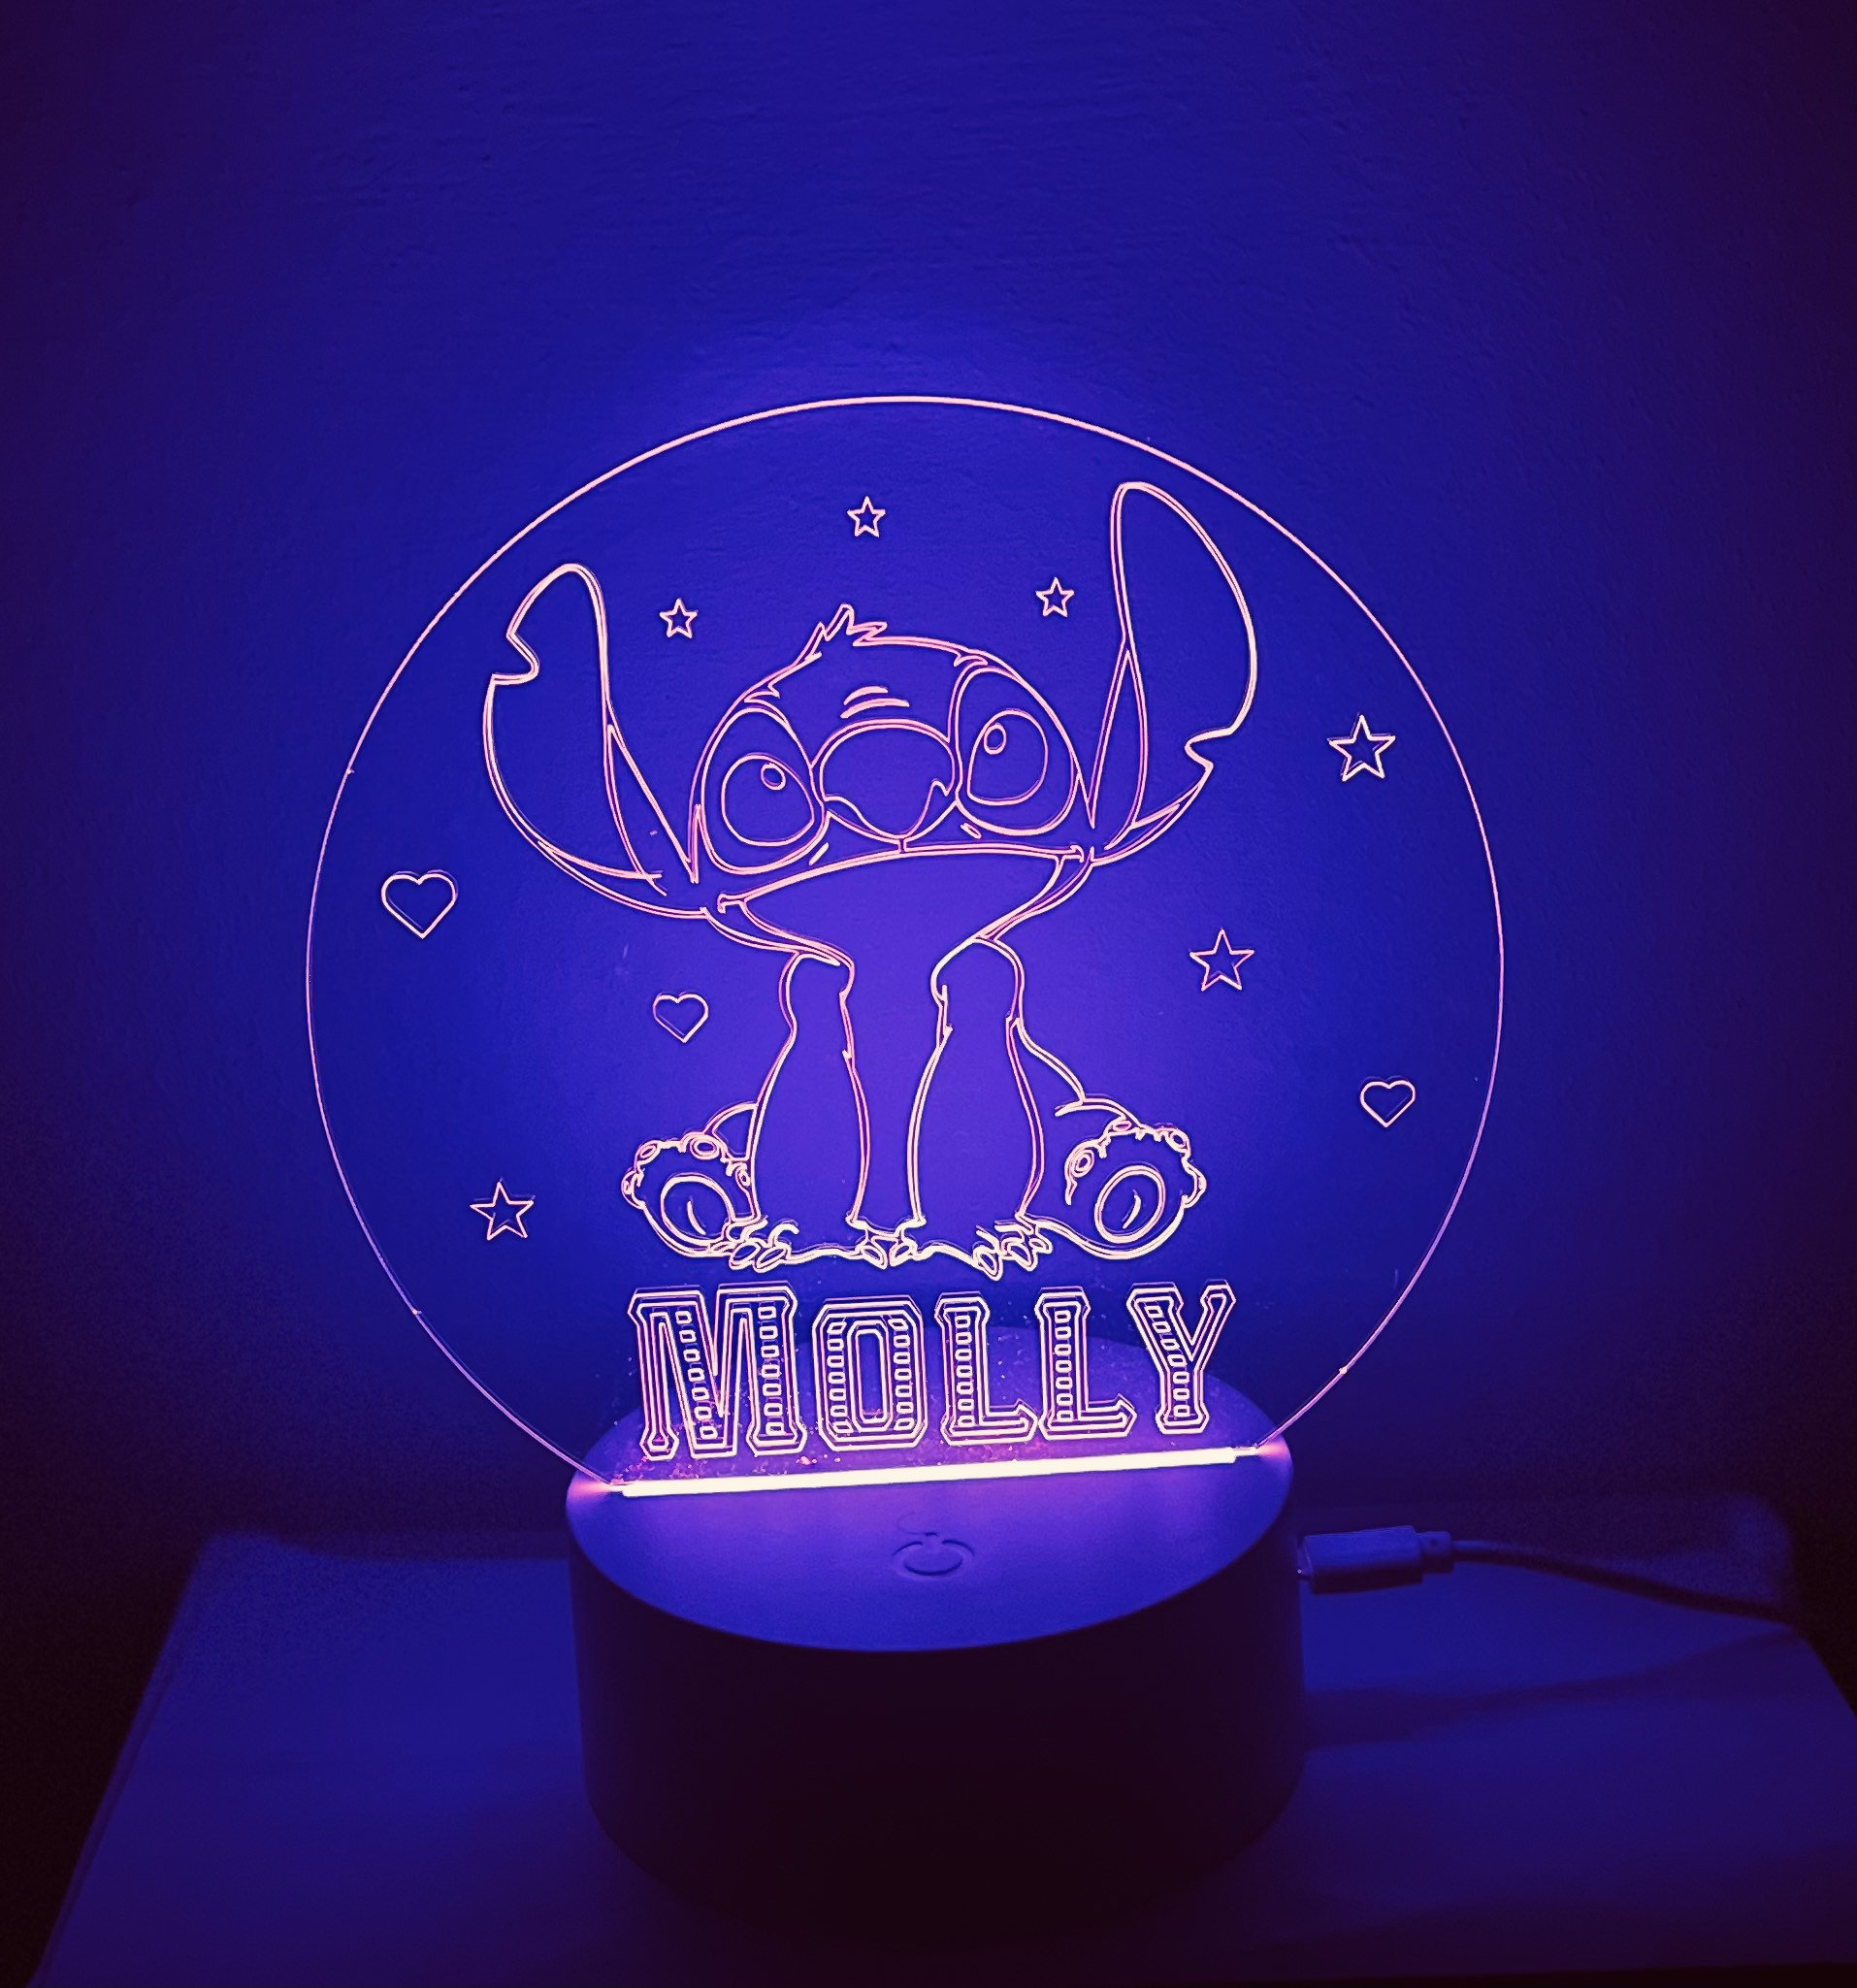 Baby Stitch 3D LED LAMP with a base of your choice! - PictyourLamp